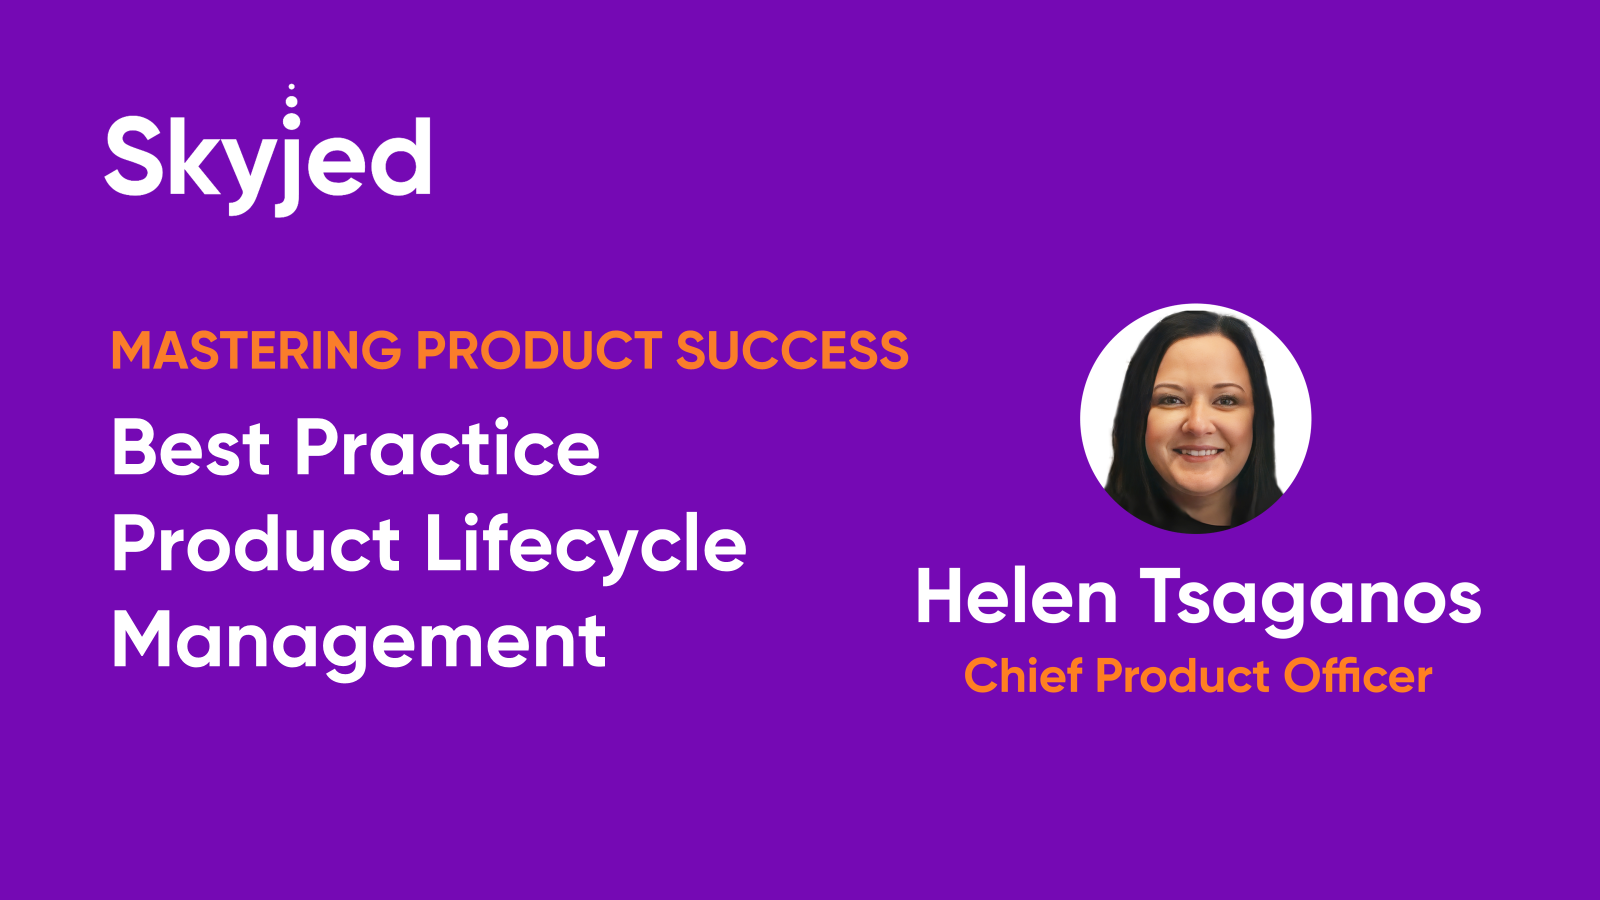 Best Practice Product Lifecycle Management